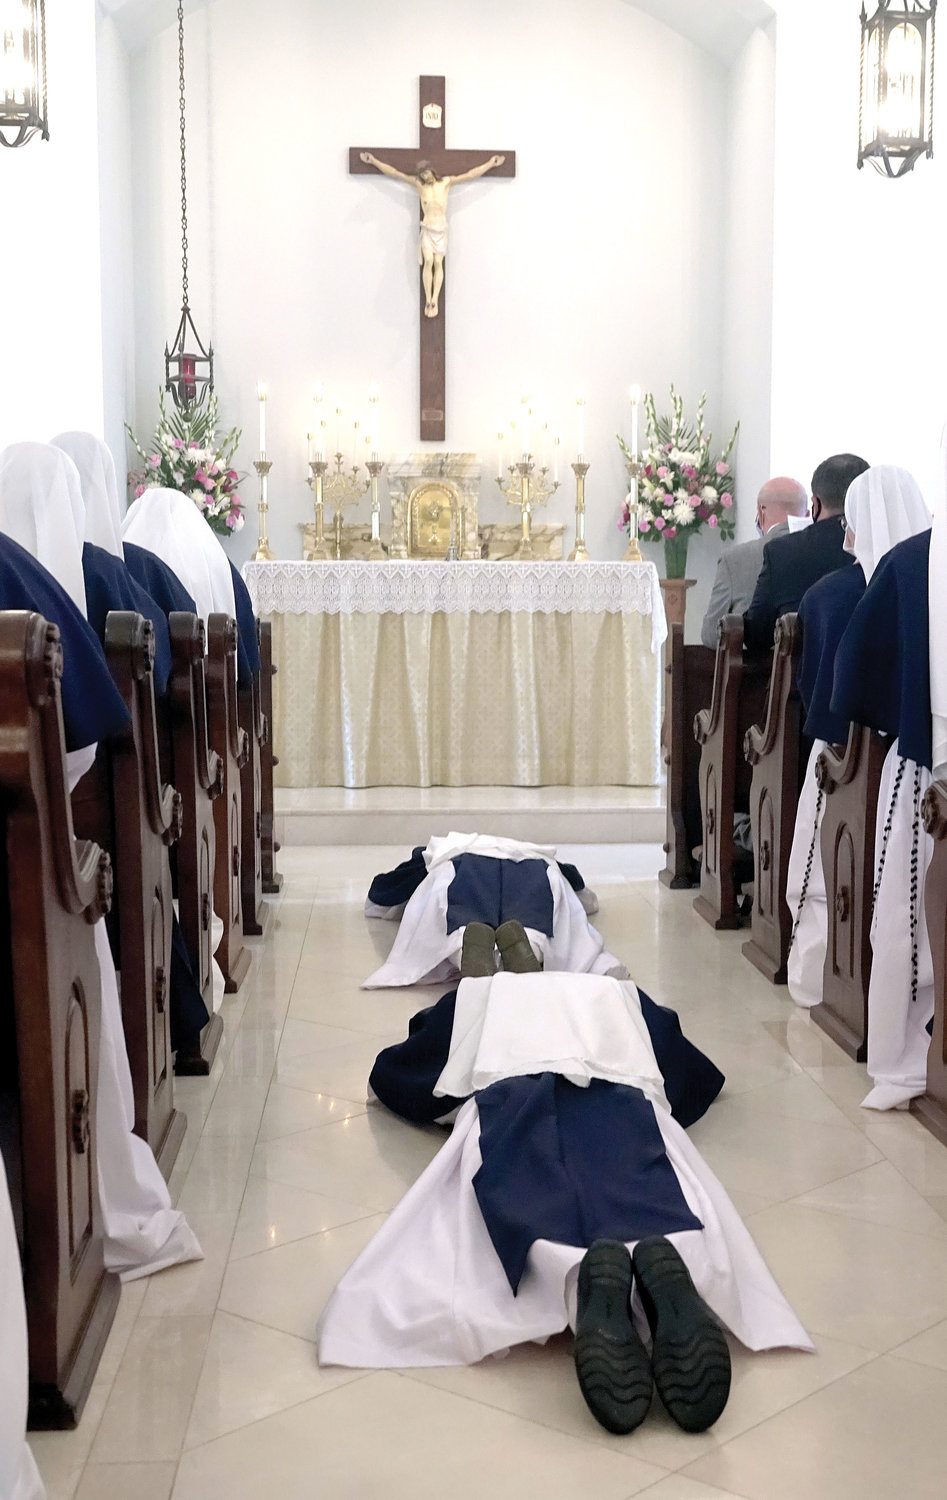 Sister Virginia Joy, S.V. and Sister Naomi Maria Magnificat, S.V., lay prostrate on the chapel floor.